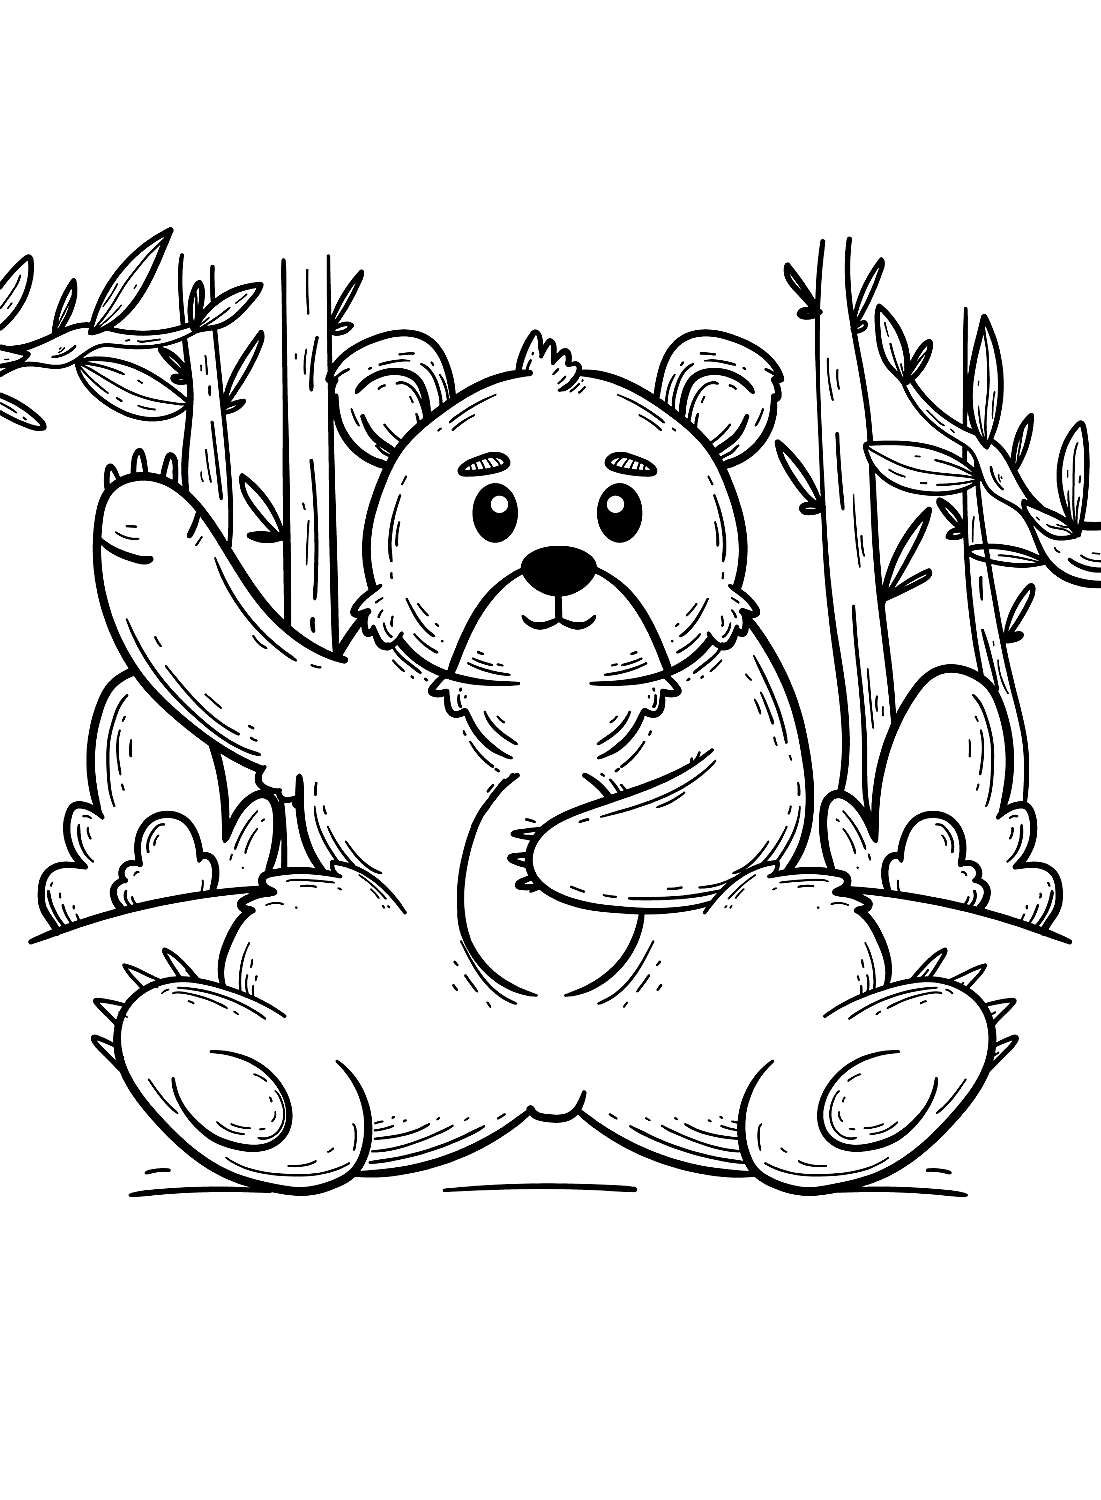 Teddy bear coloring page free